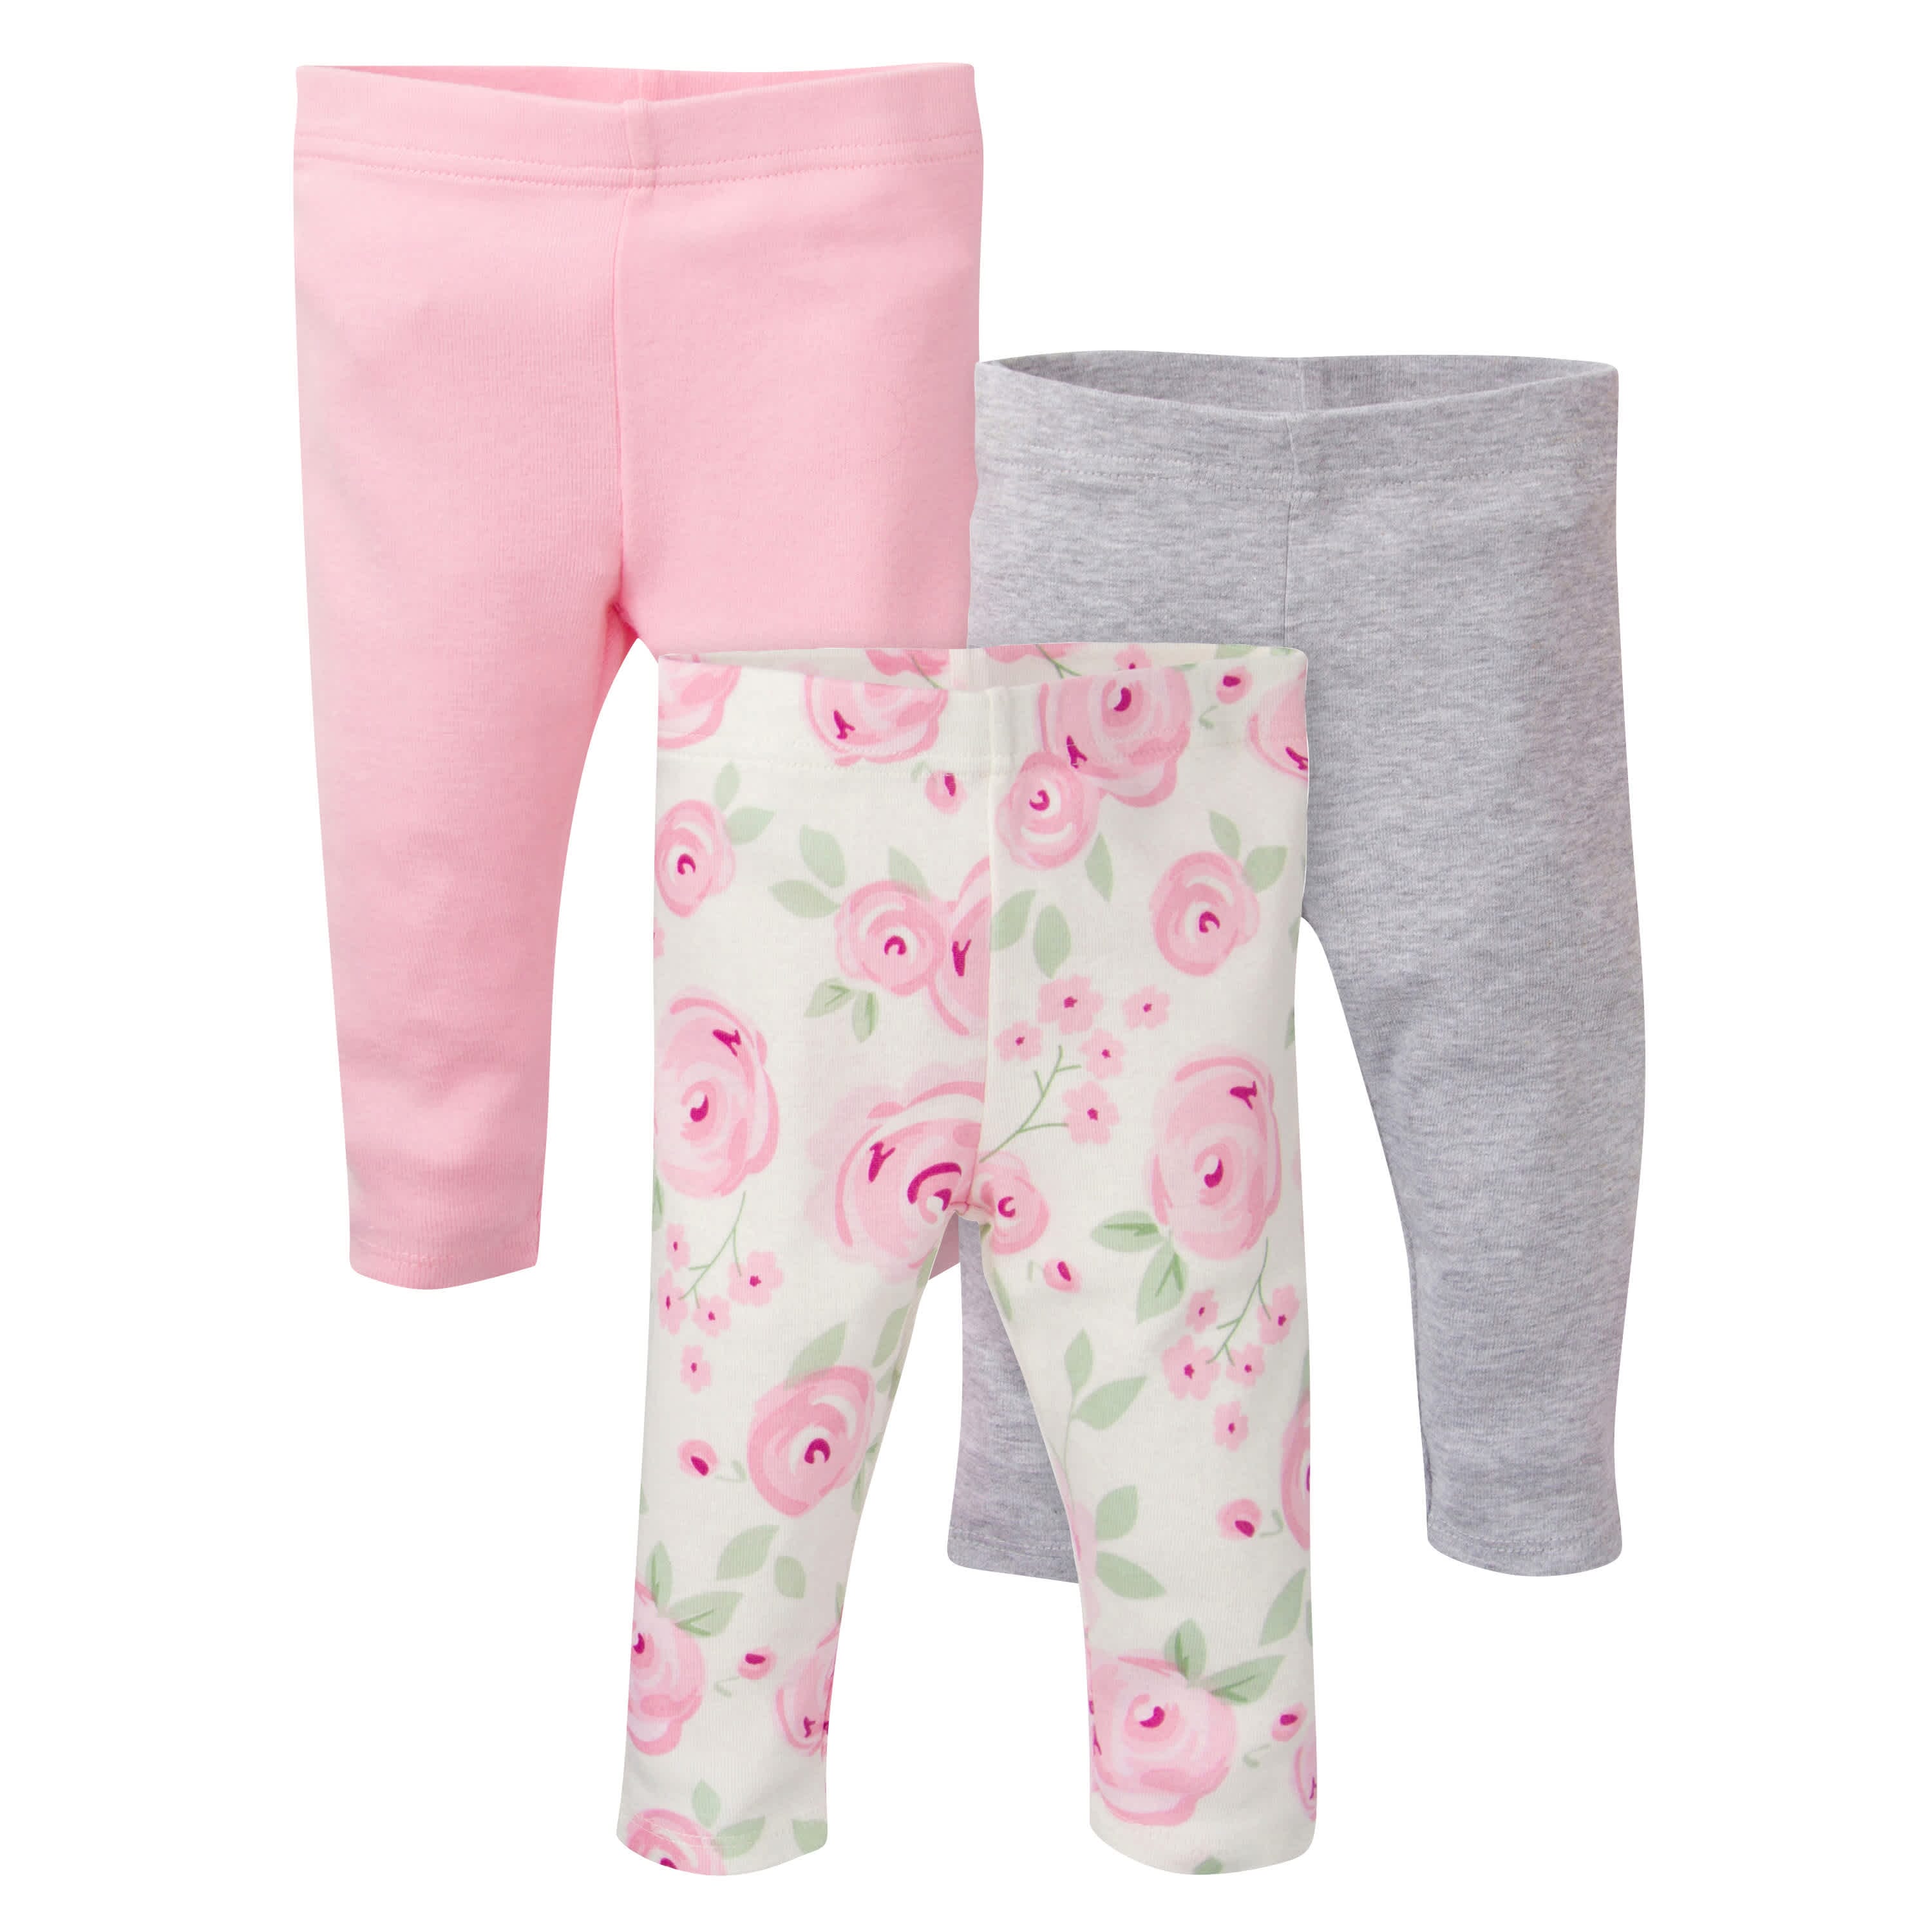 Image of 3-Pack Baby Girls Pink, Gray, & Floral Leggings